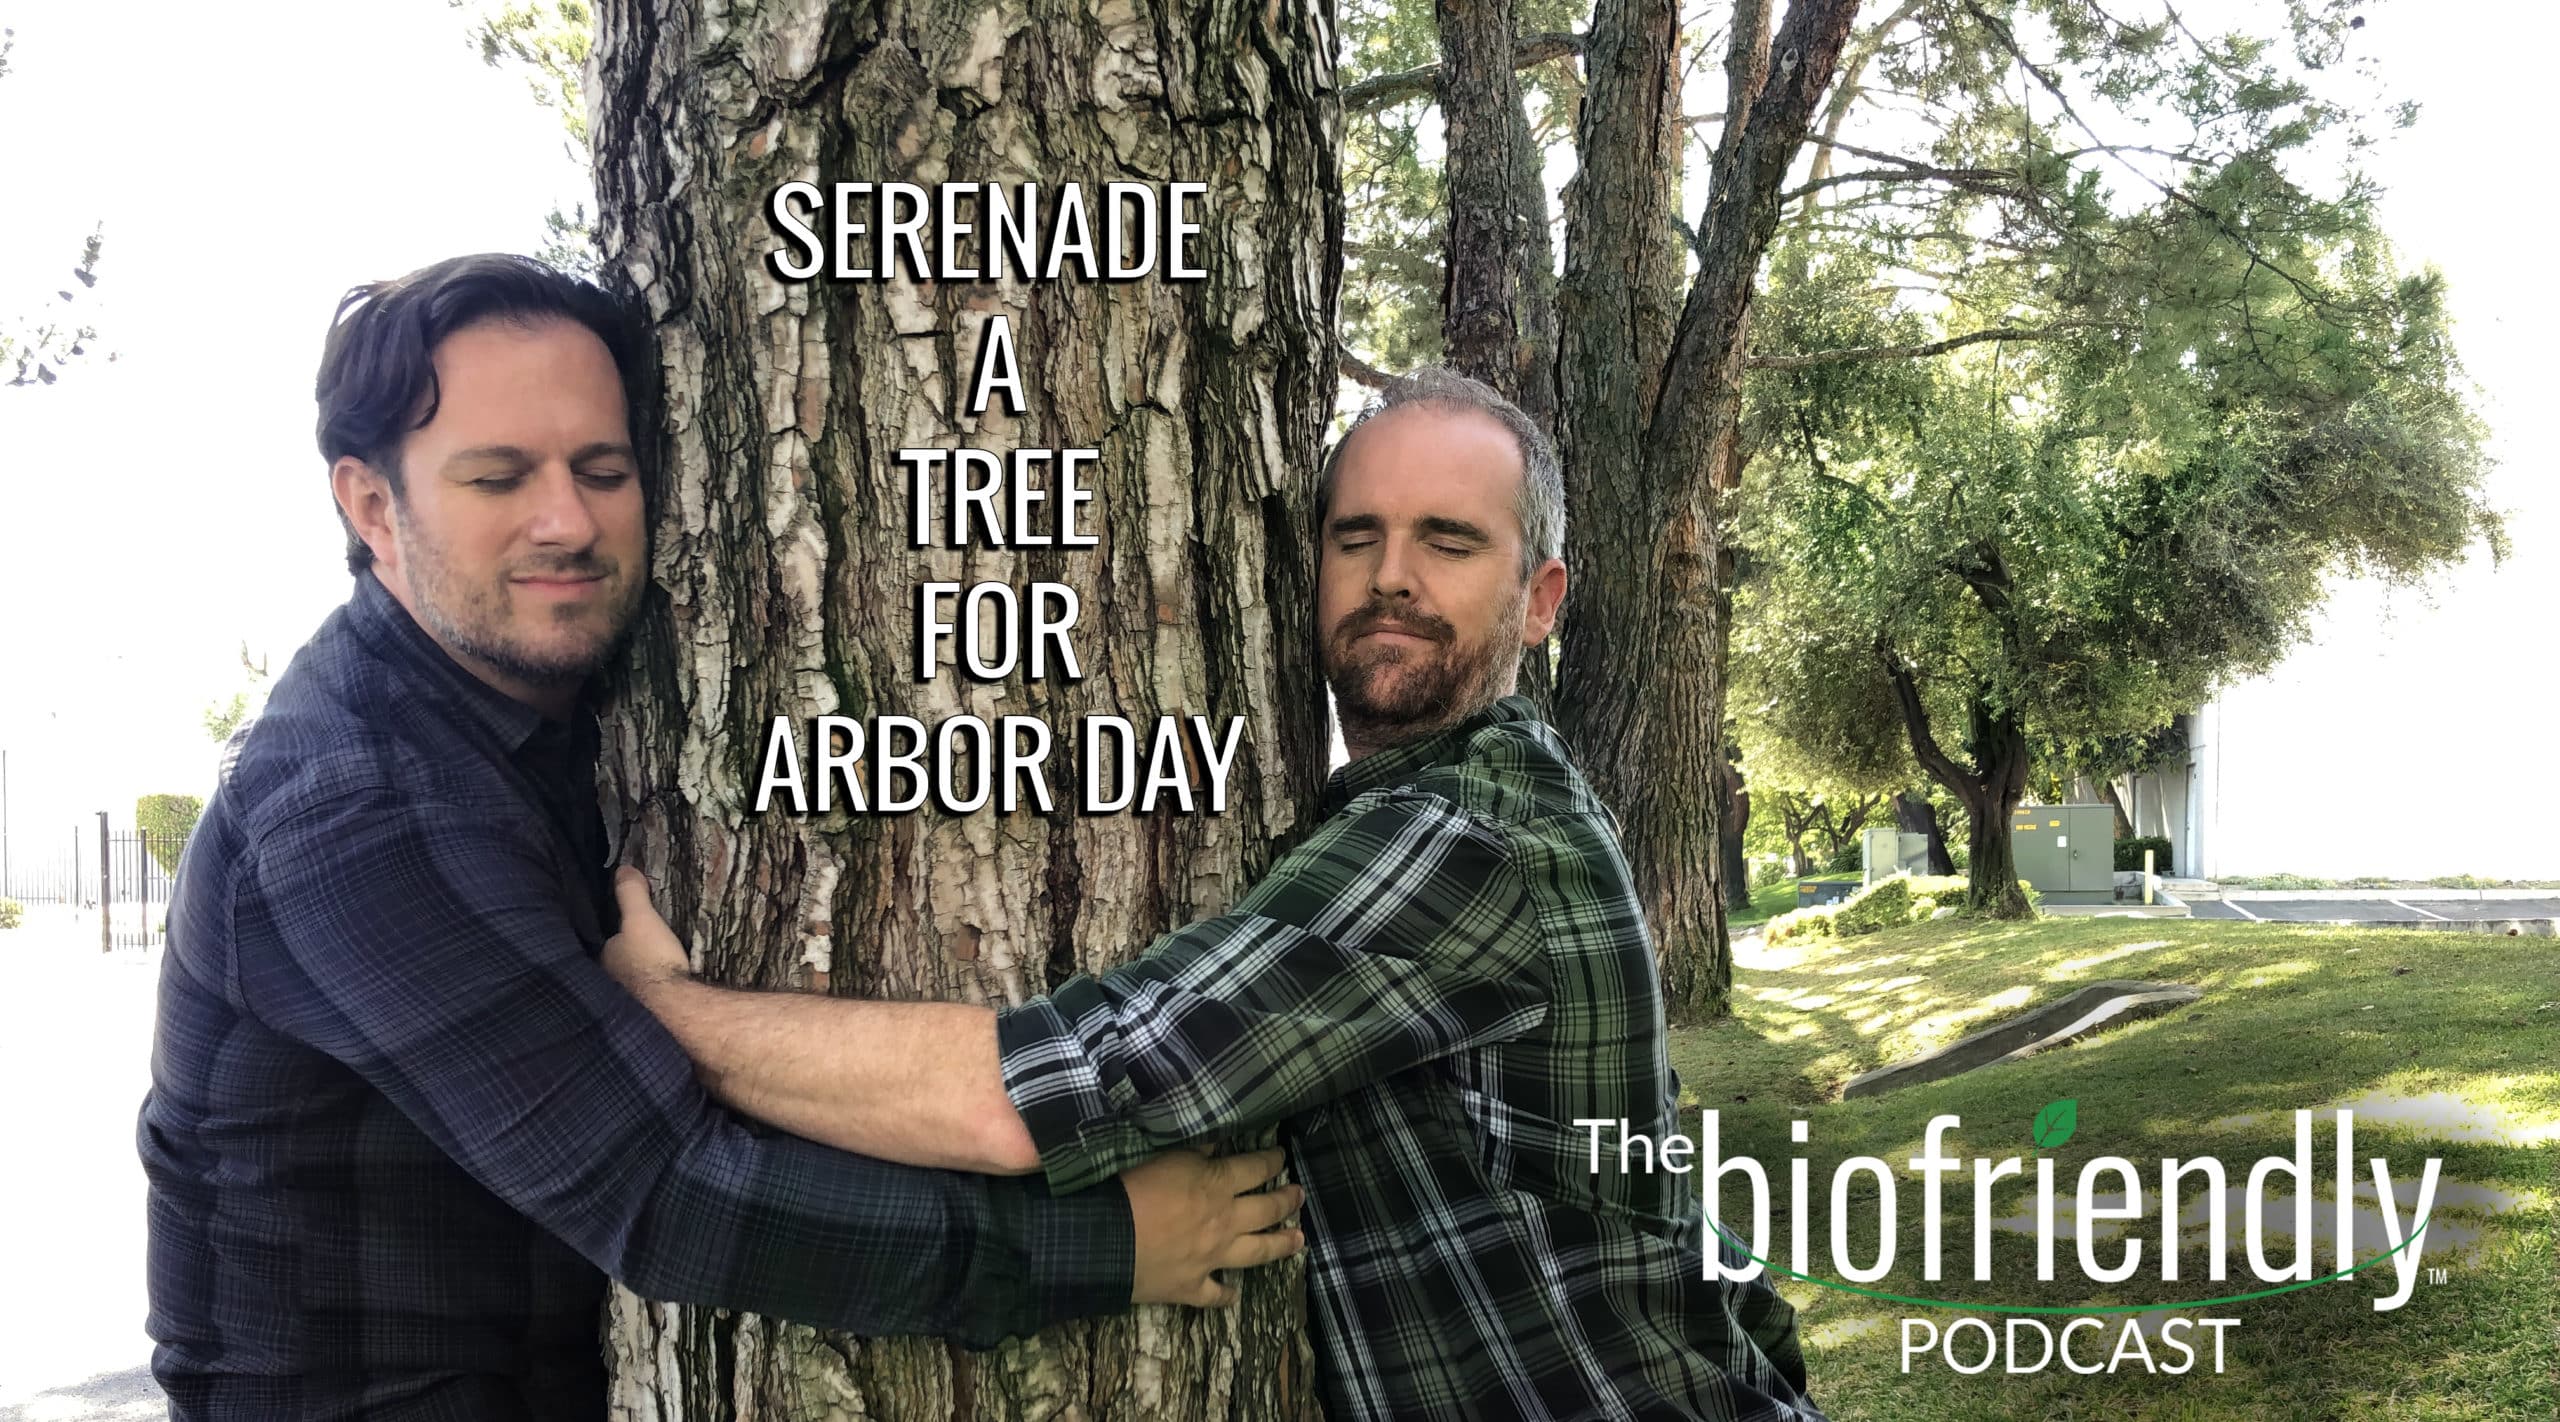 The Biofriendly Podcast - Episode 9 - Serenade A Tree For Arbor Day